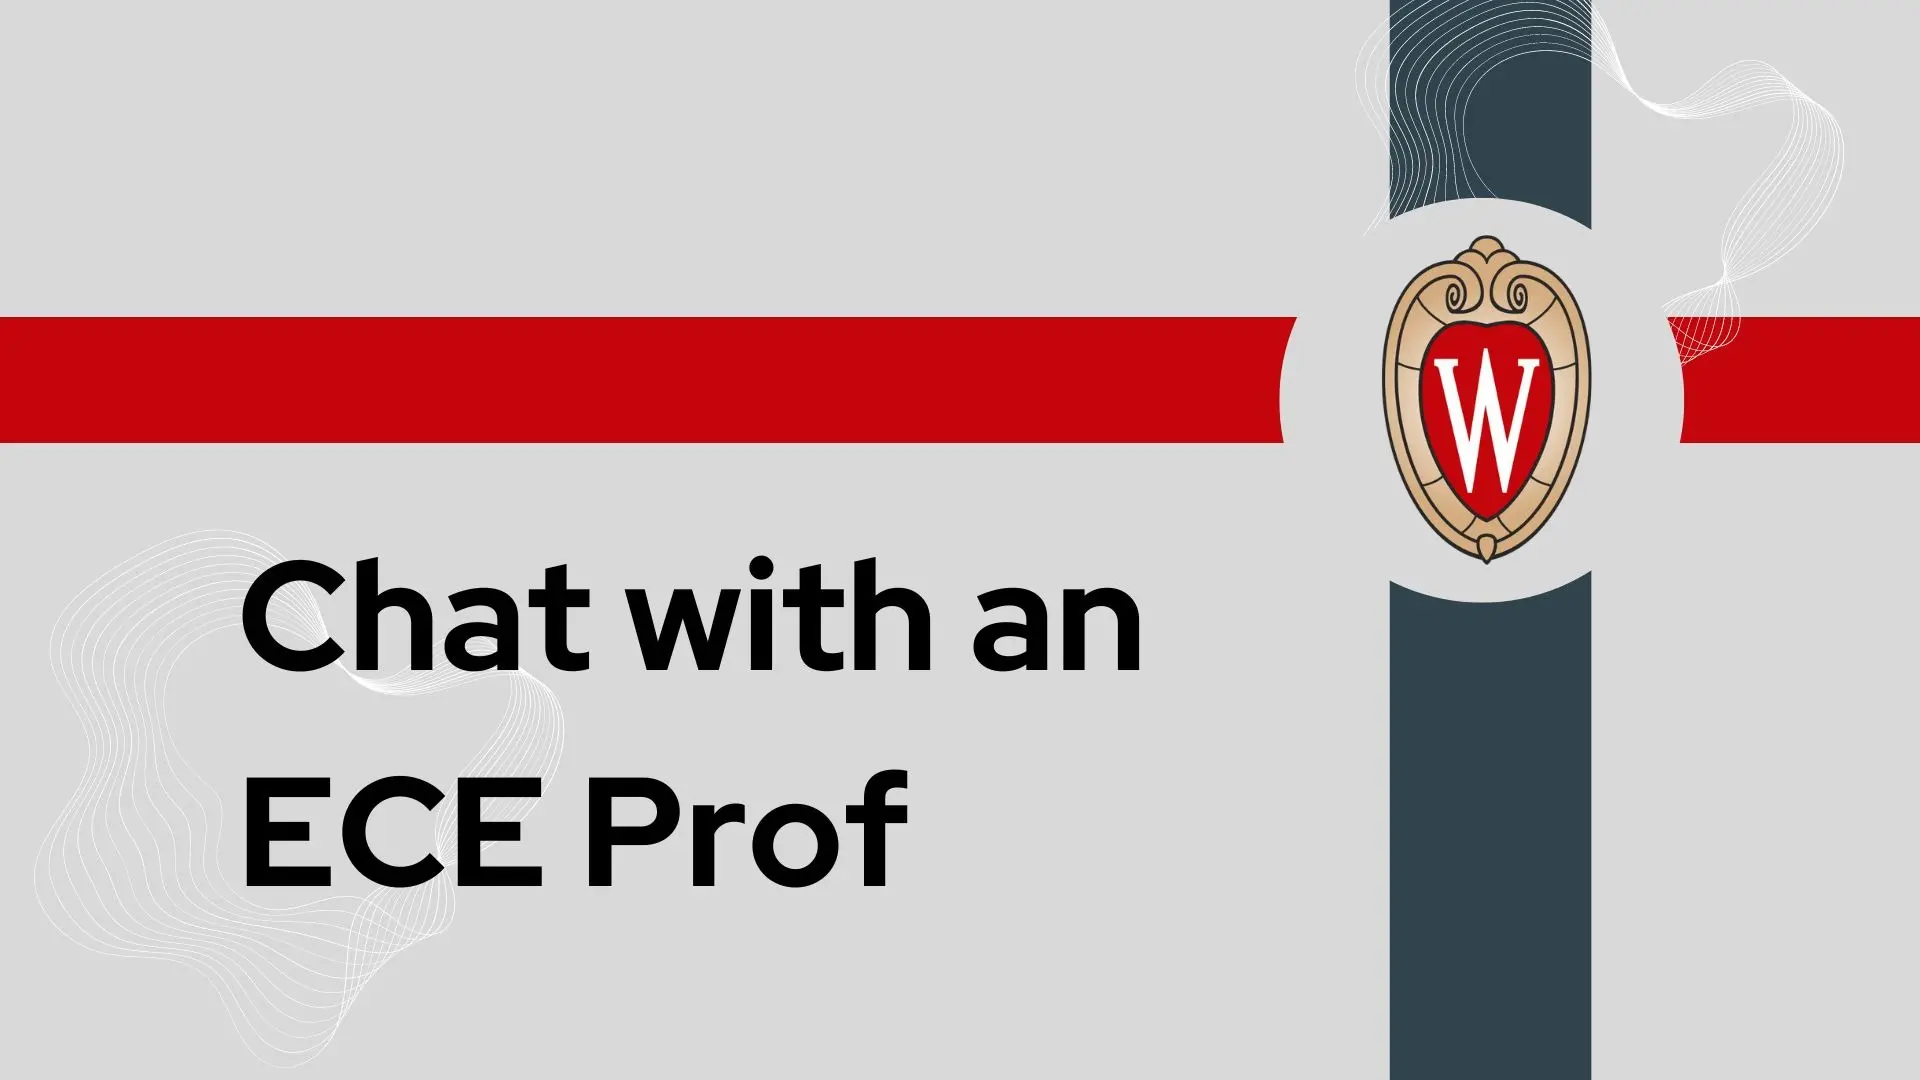 Chat with an ECE Prof graphic